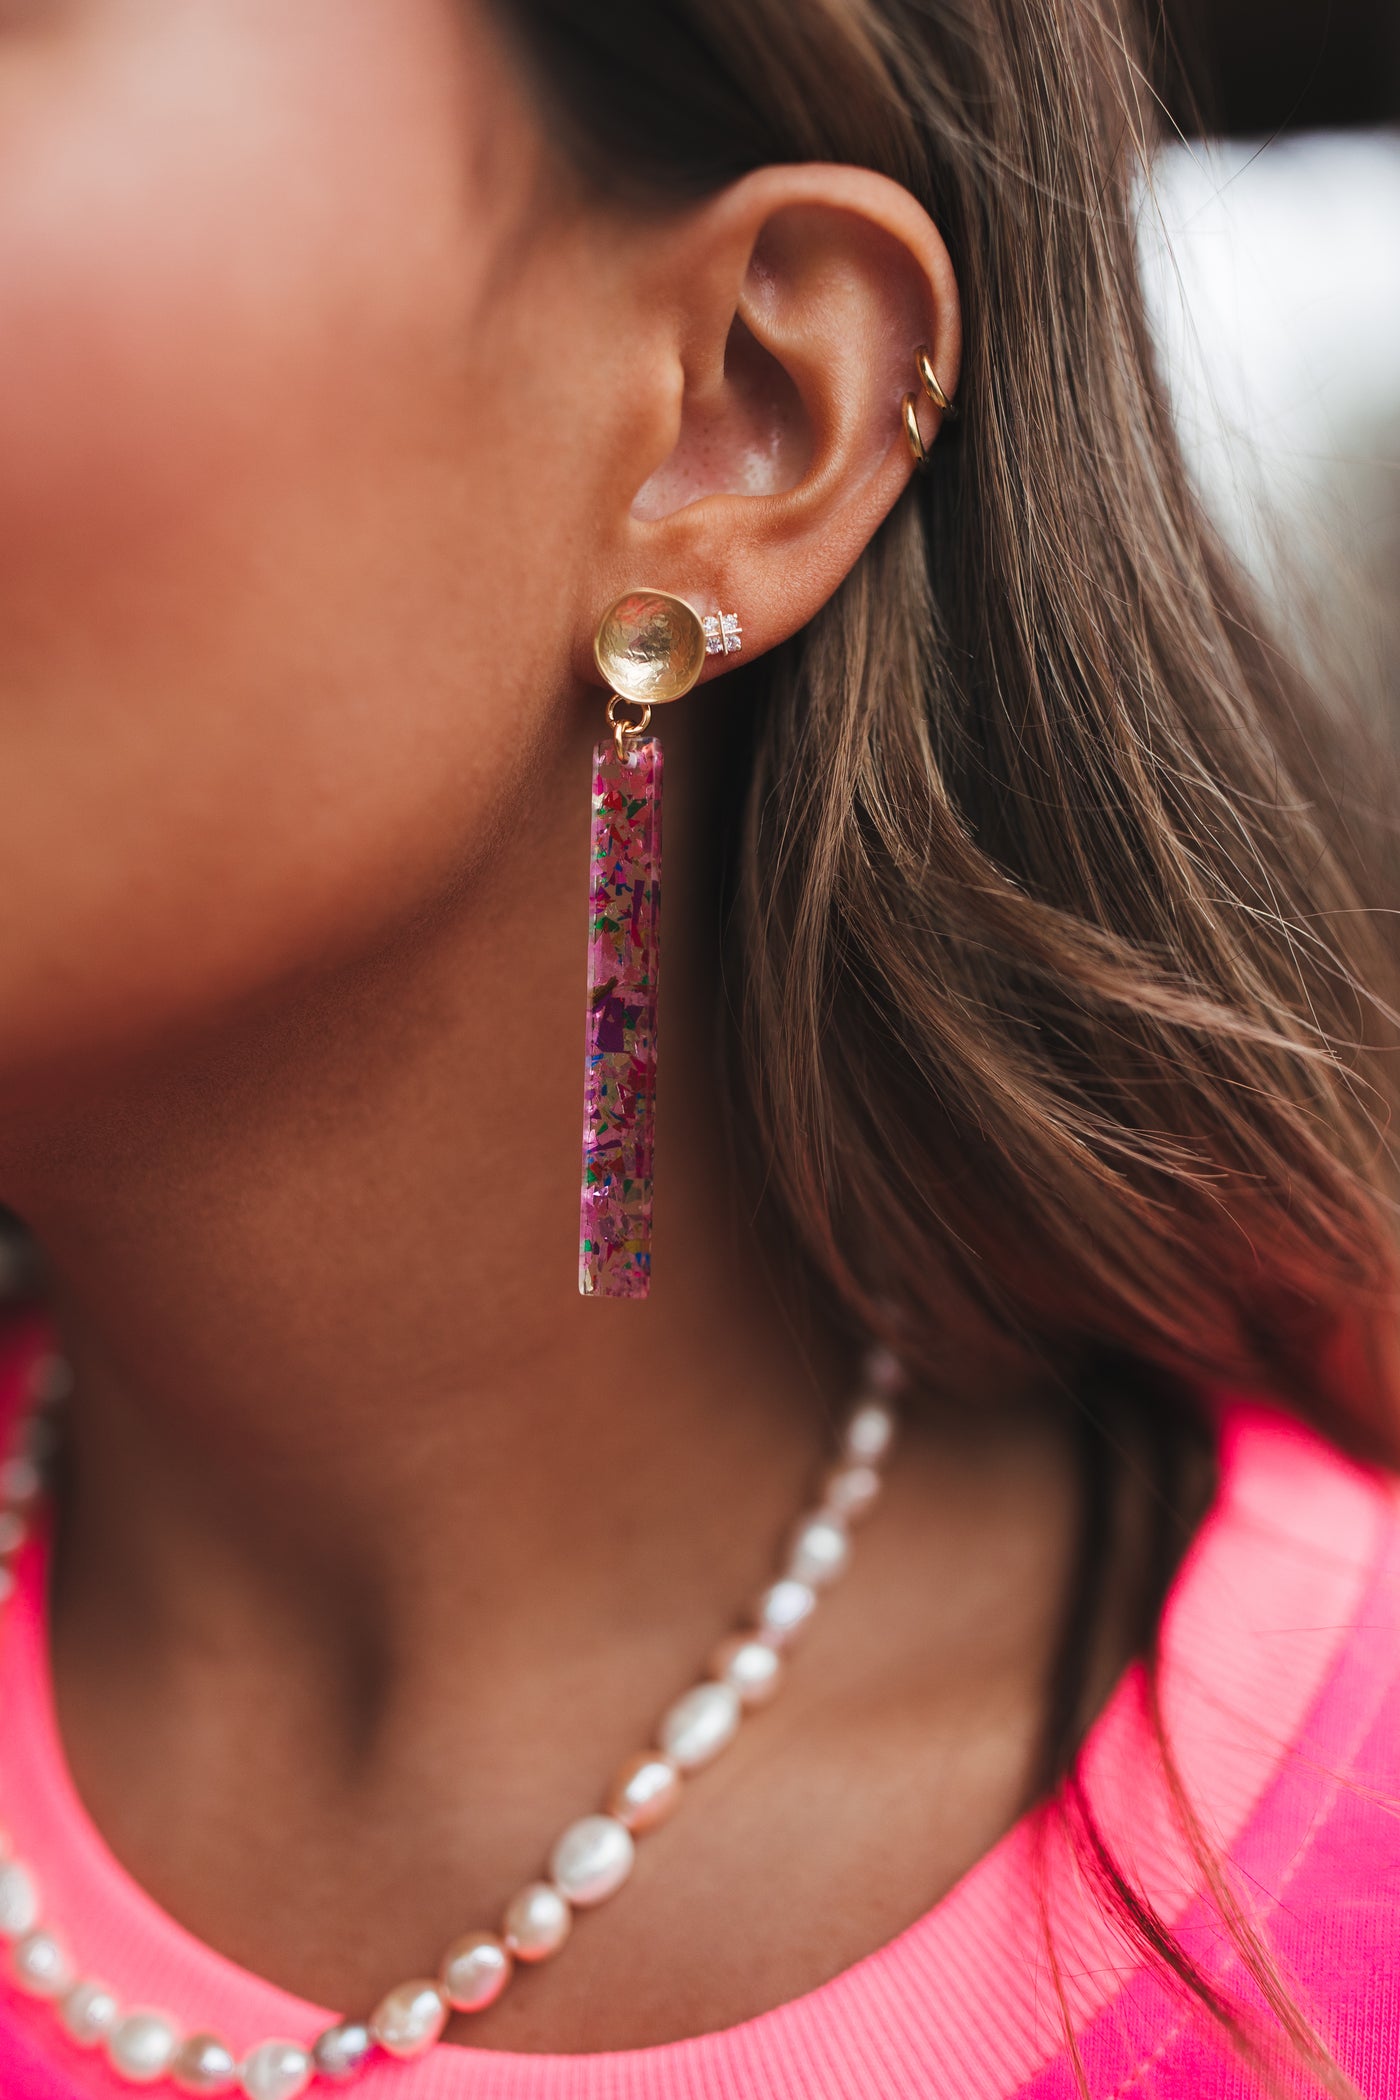 Virtue Jewelry Hammered Post w/ Acrylic Bar Earrings - Pink Party